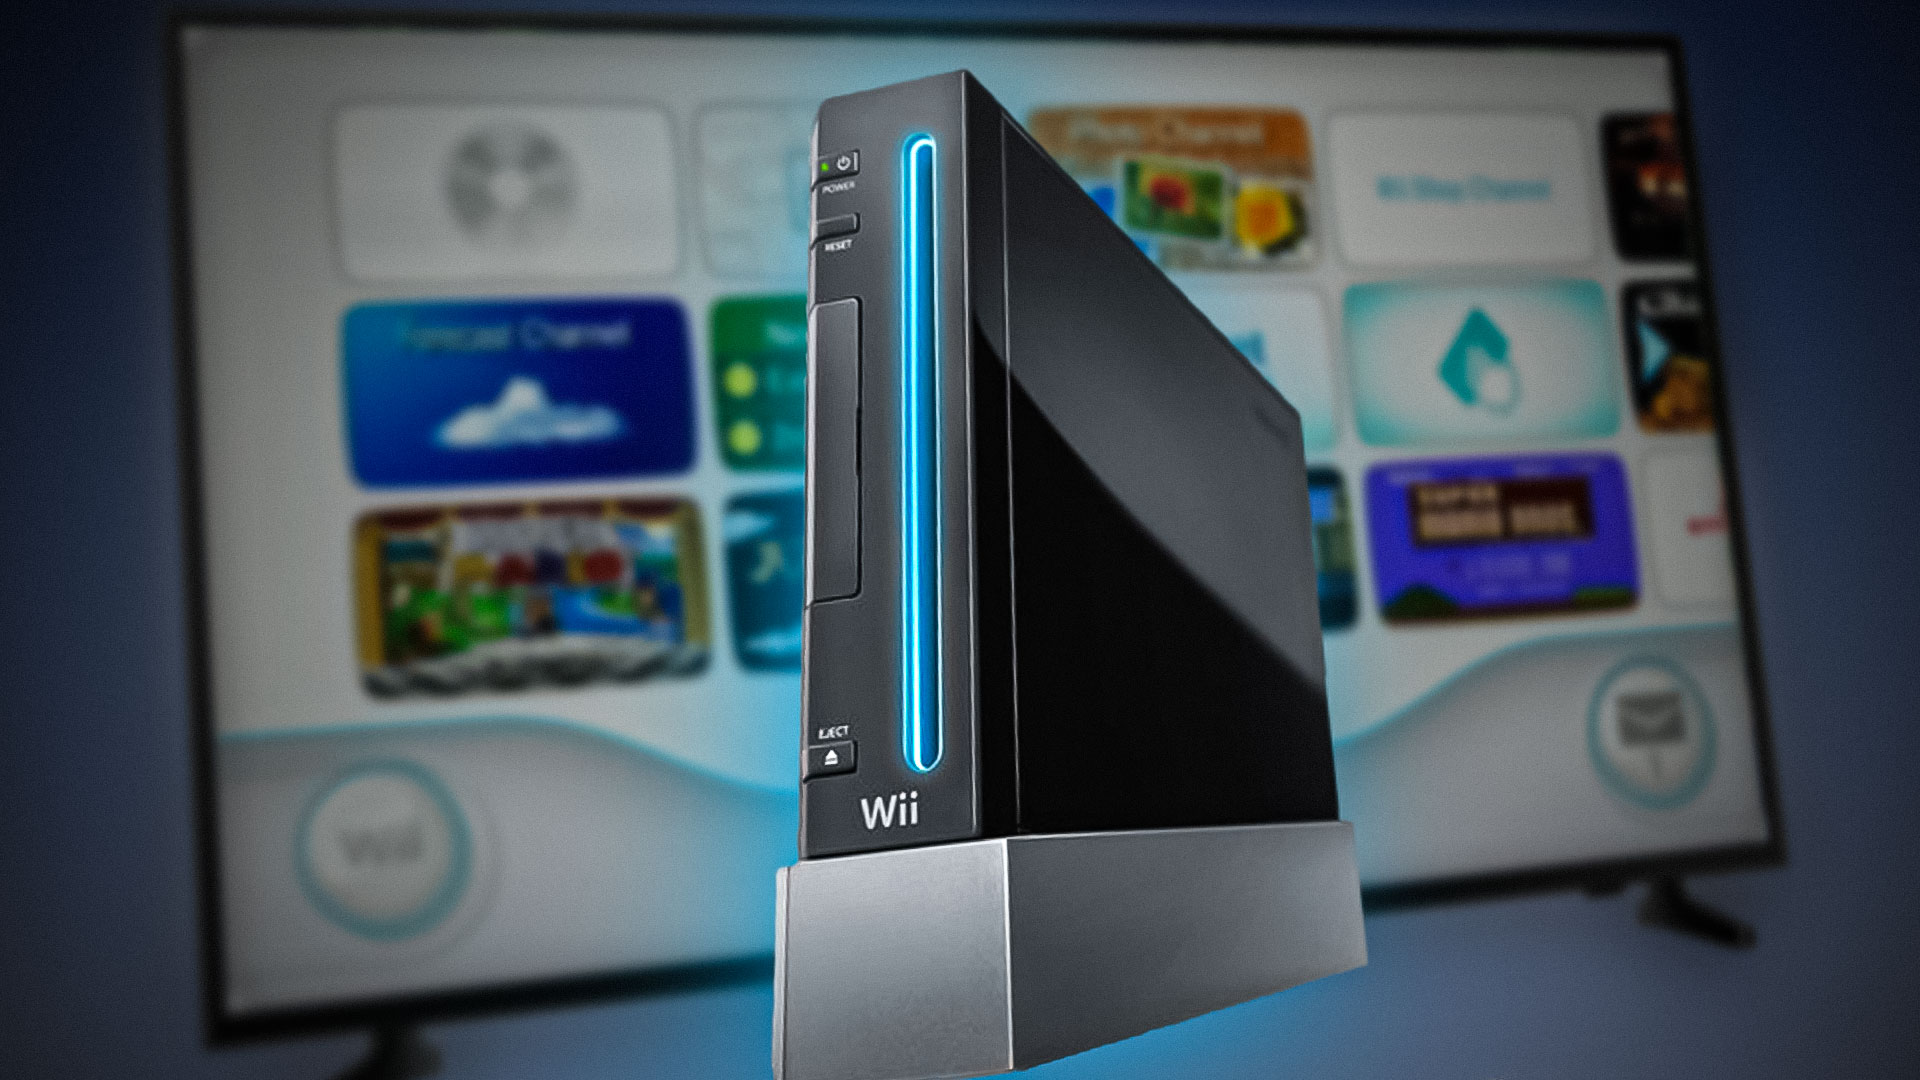 discretie Chemicus envelop How to Connect Nintendo Wii to Smart Tv?